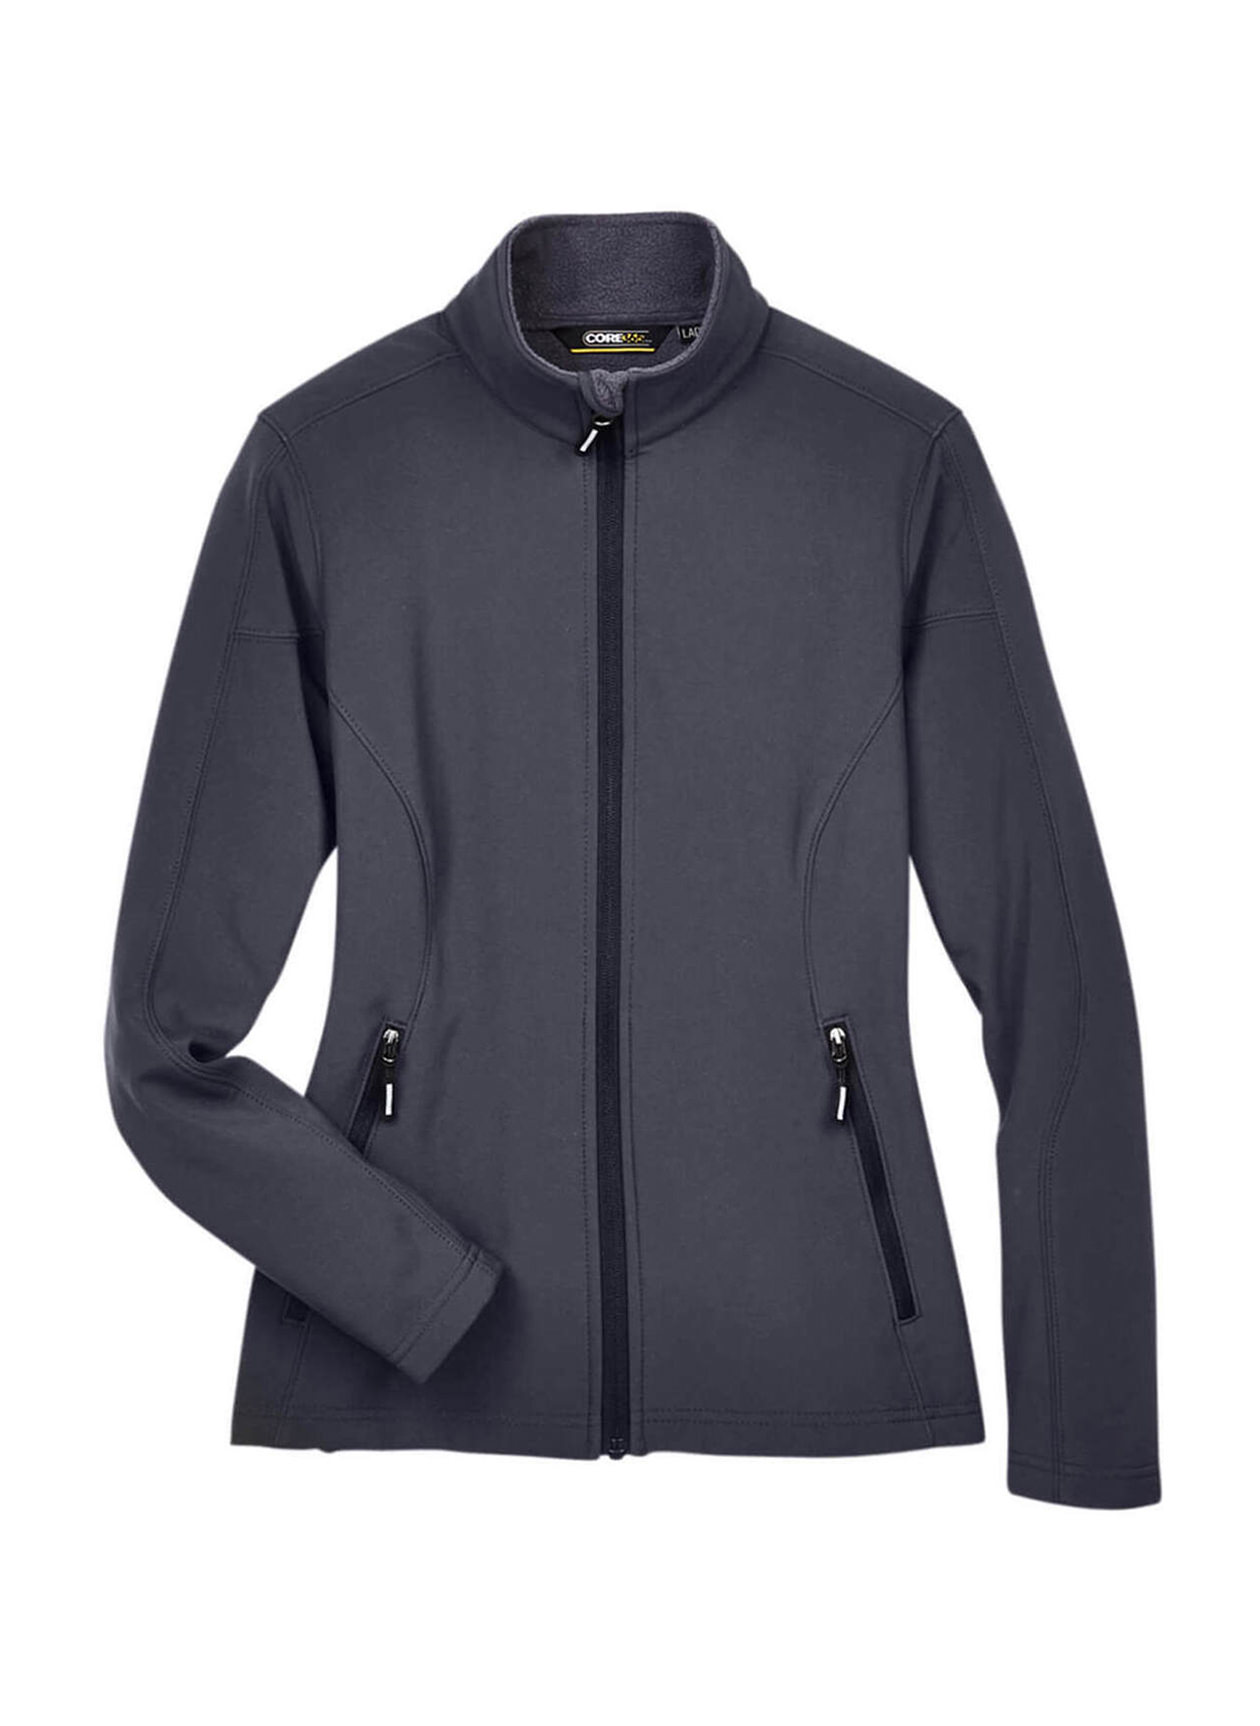 Core 365 Women's Carbon Cruise Two-Layer Fleece Bonded Soft Shell Jacket